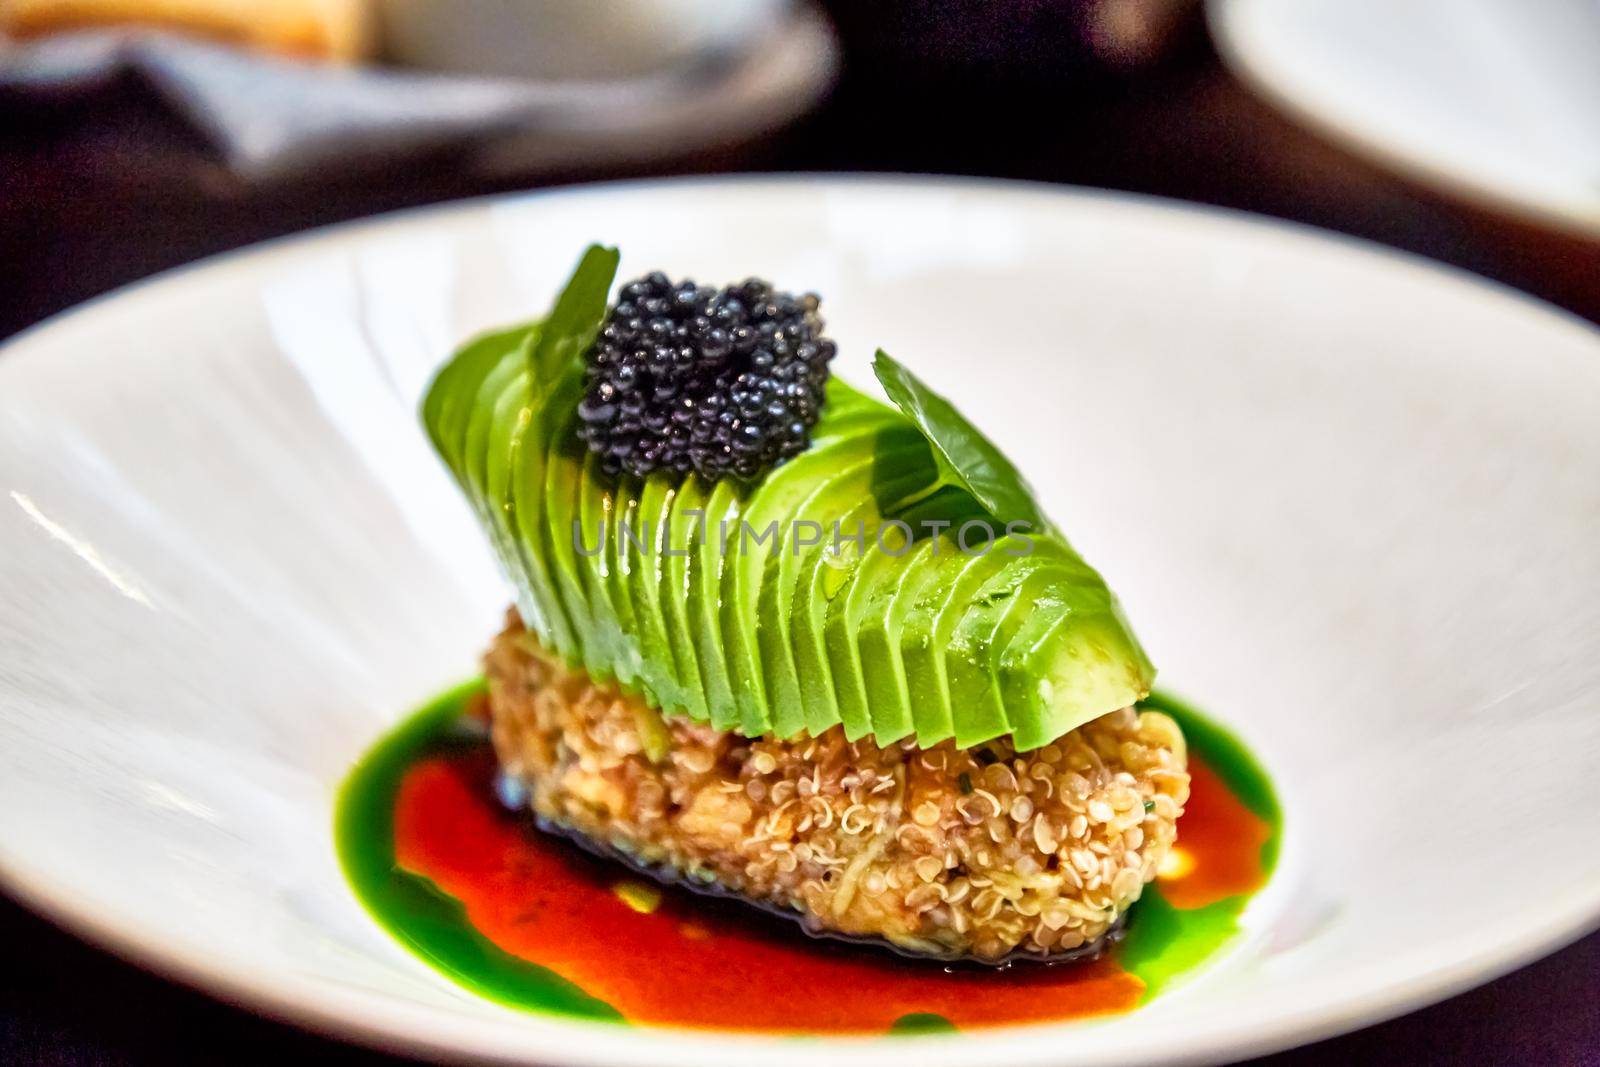 Fish or crab cutlet with avocado and halibut caviar.